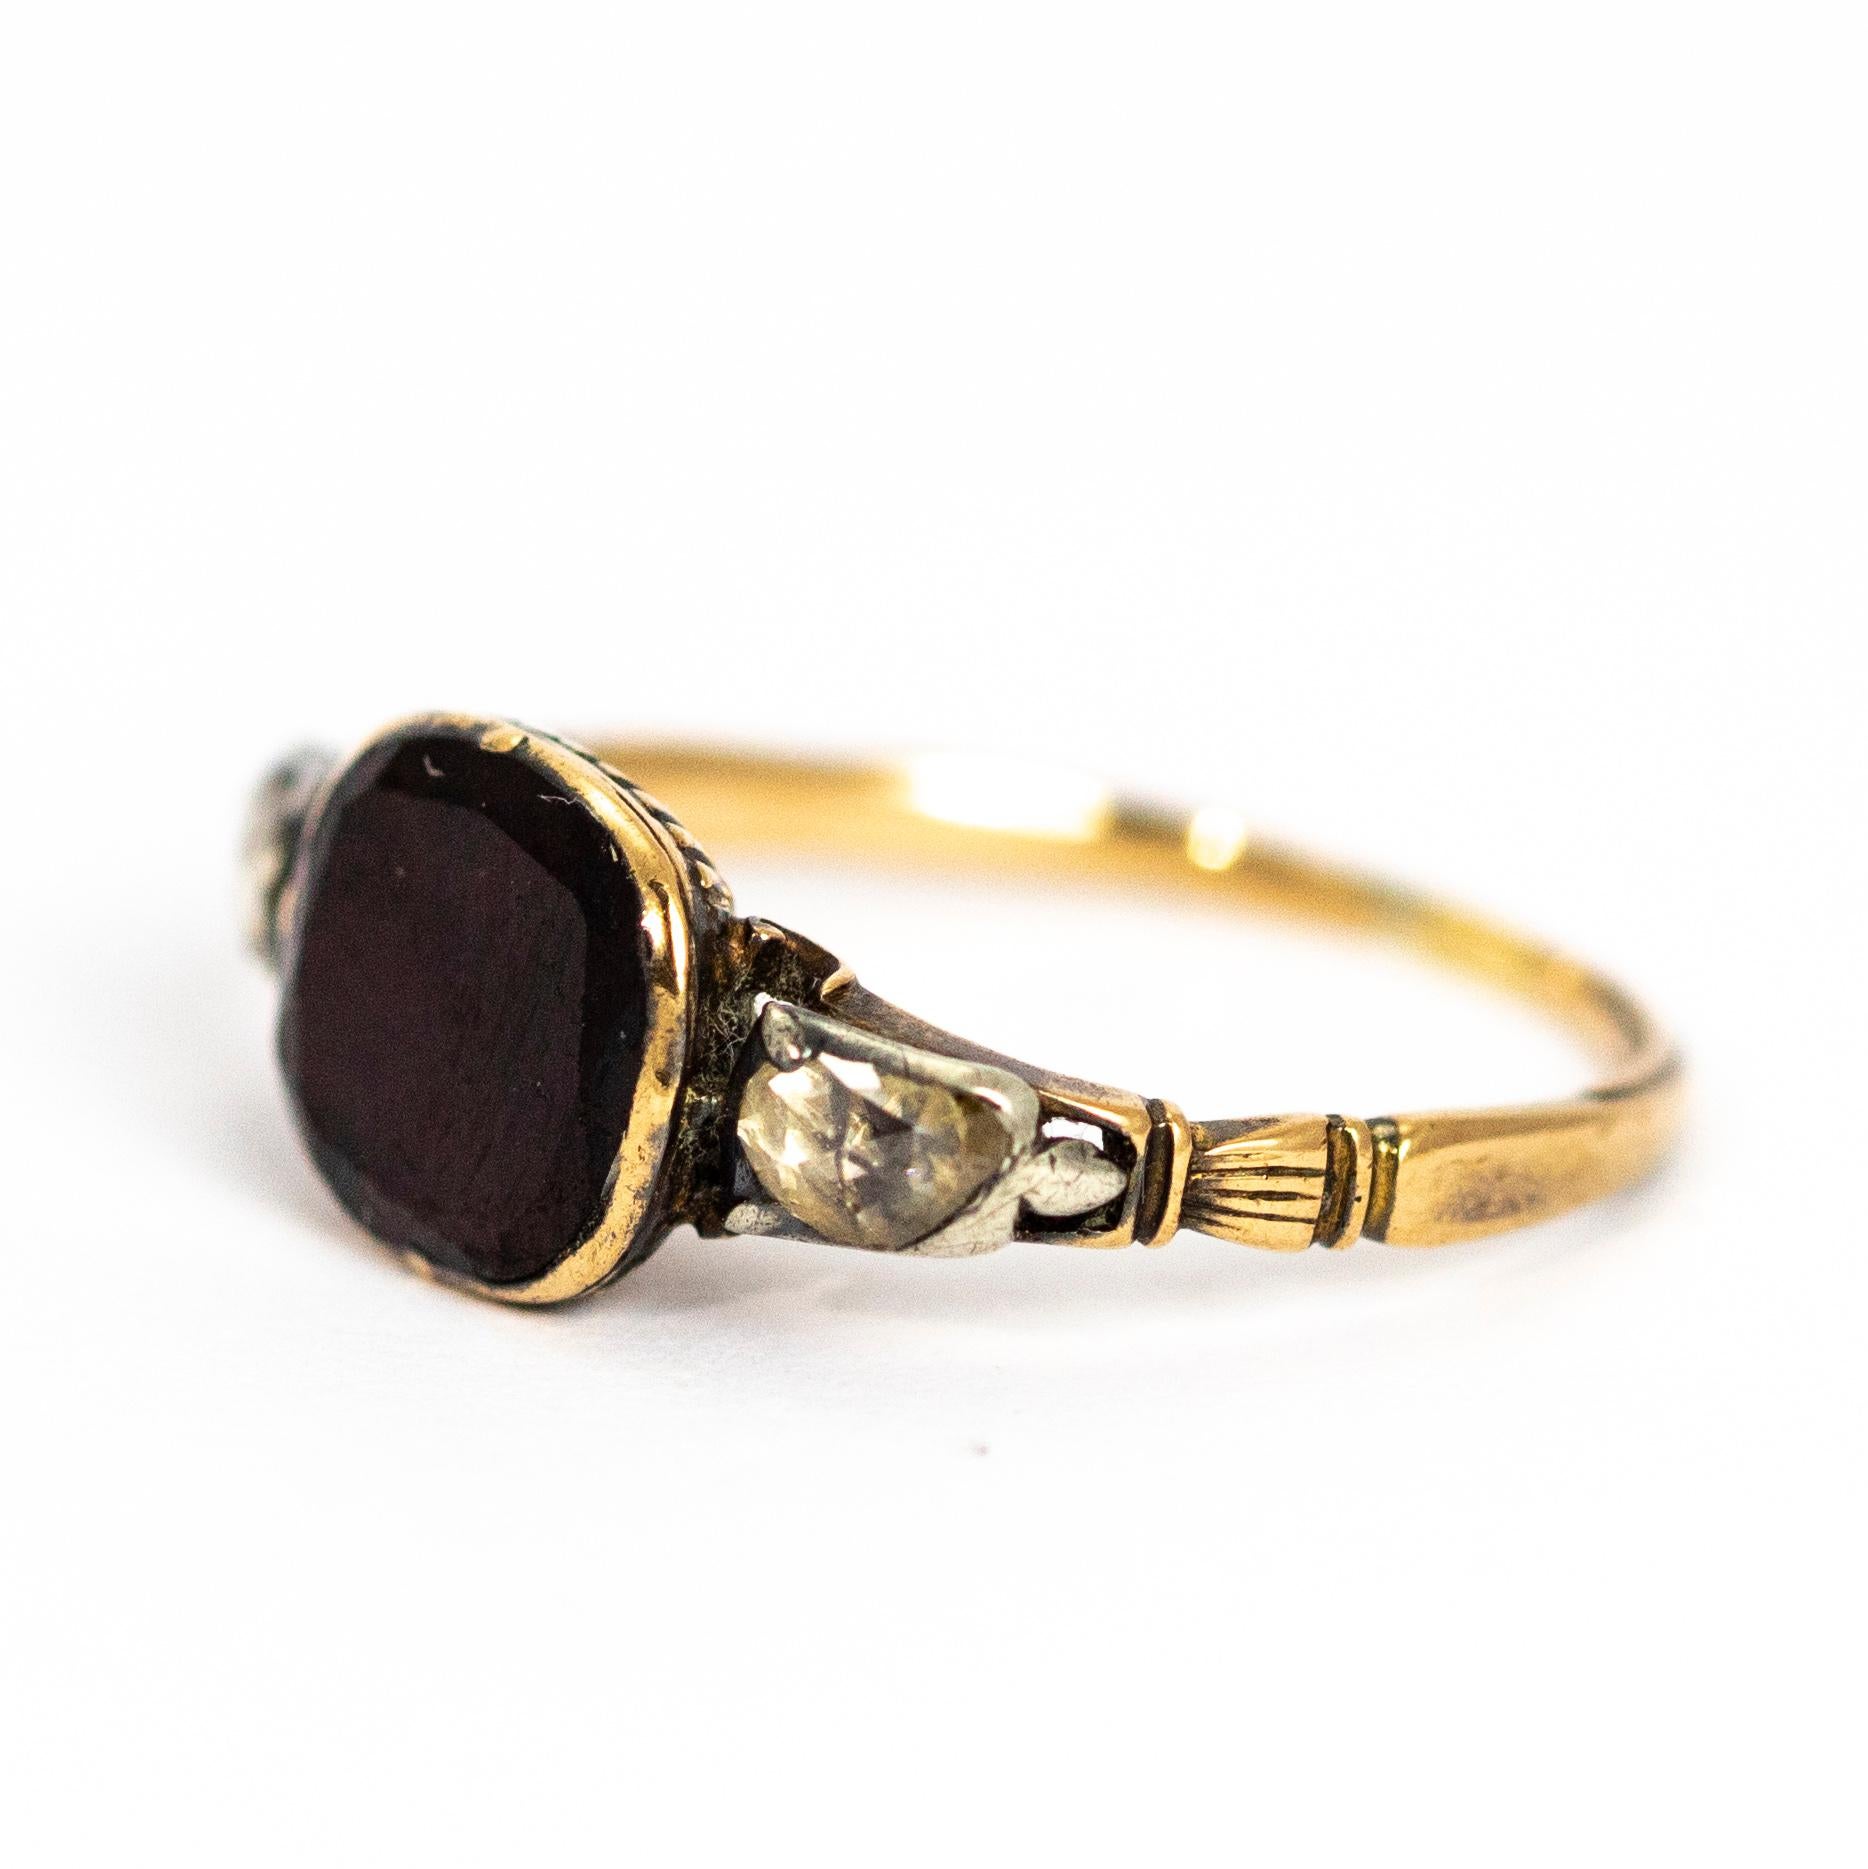 This wonderful Georgian ring holds a large flat cut garnet which sits between two single, good sized rose cut diamonds. The underneath of the garnet setting has lovely detail of its own. This ring is in lovely condition and is modelled out of 18